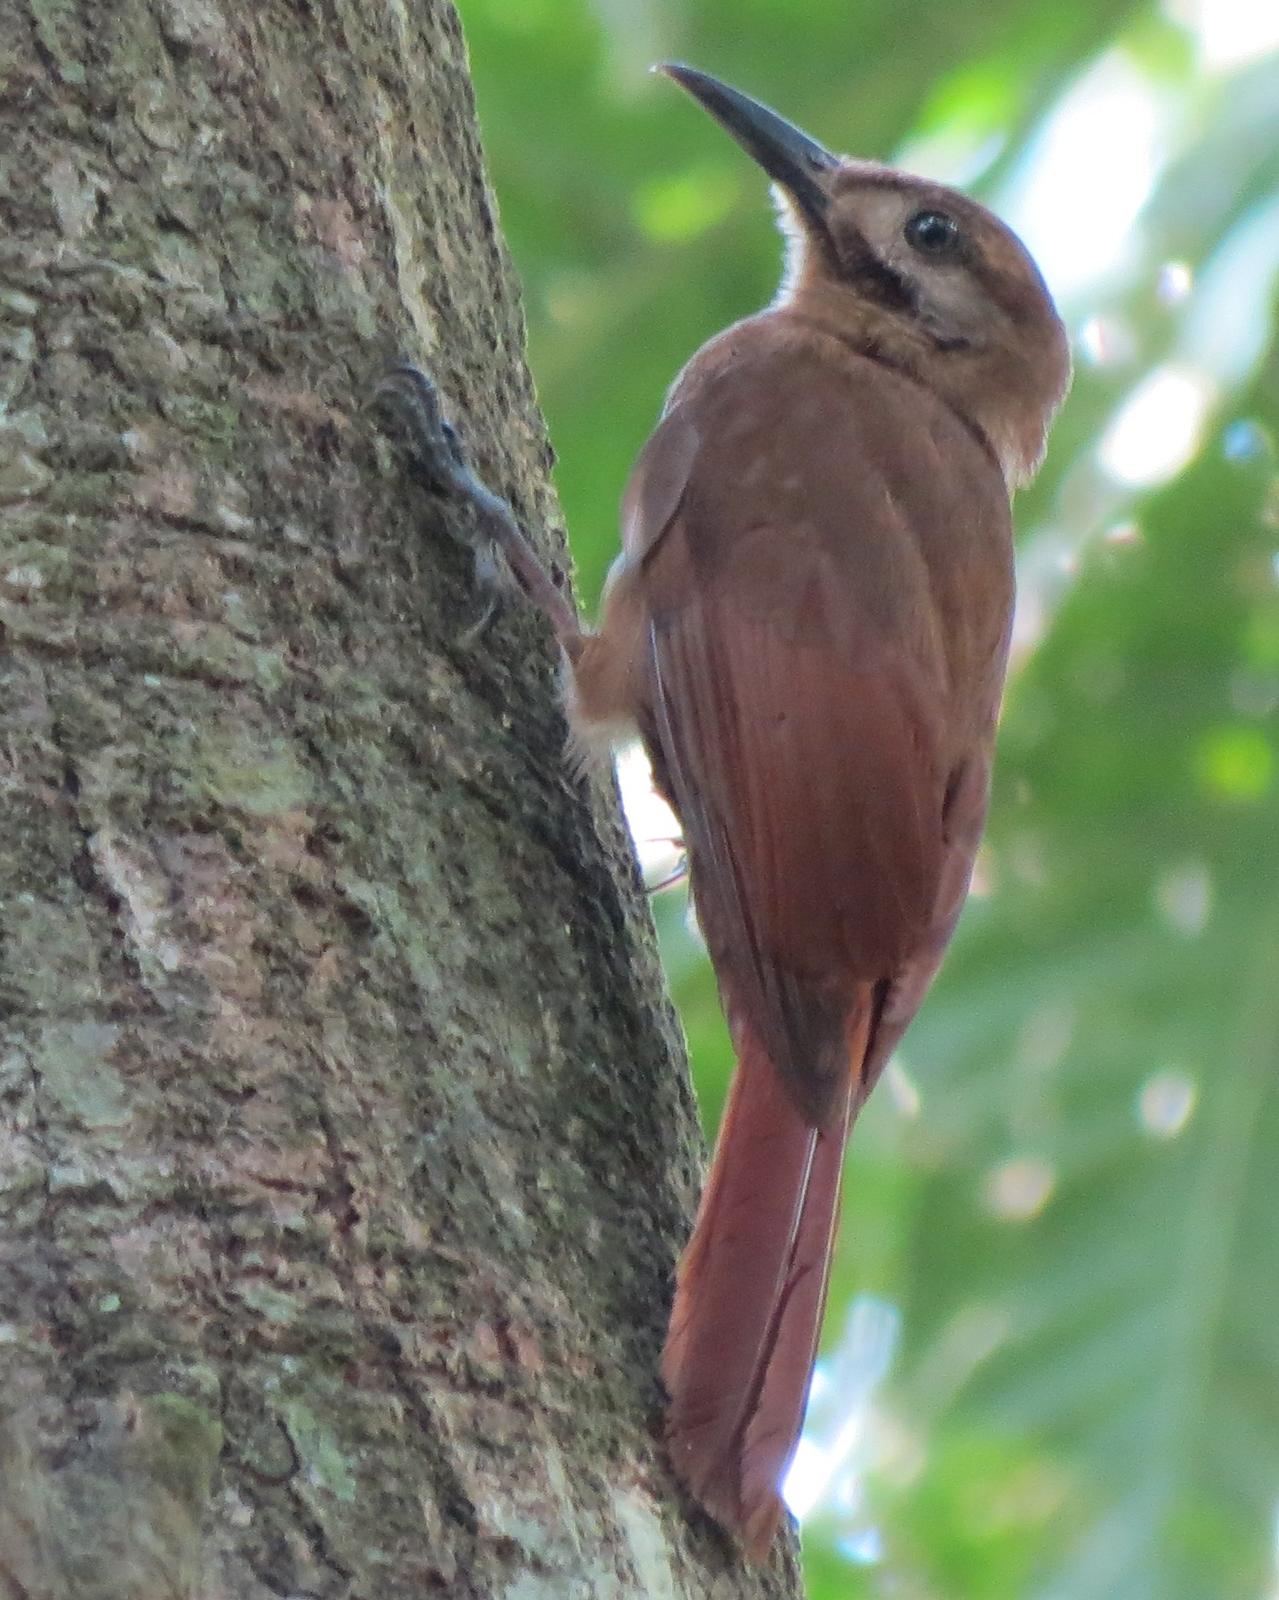 Plain-brown Woodcreeper Photo by David Bell